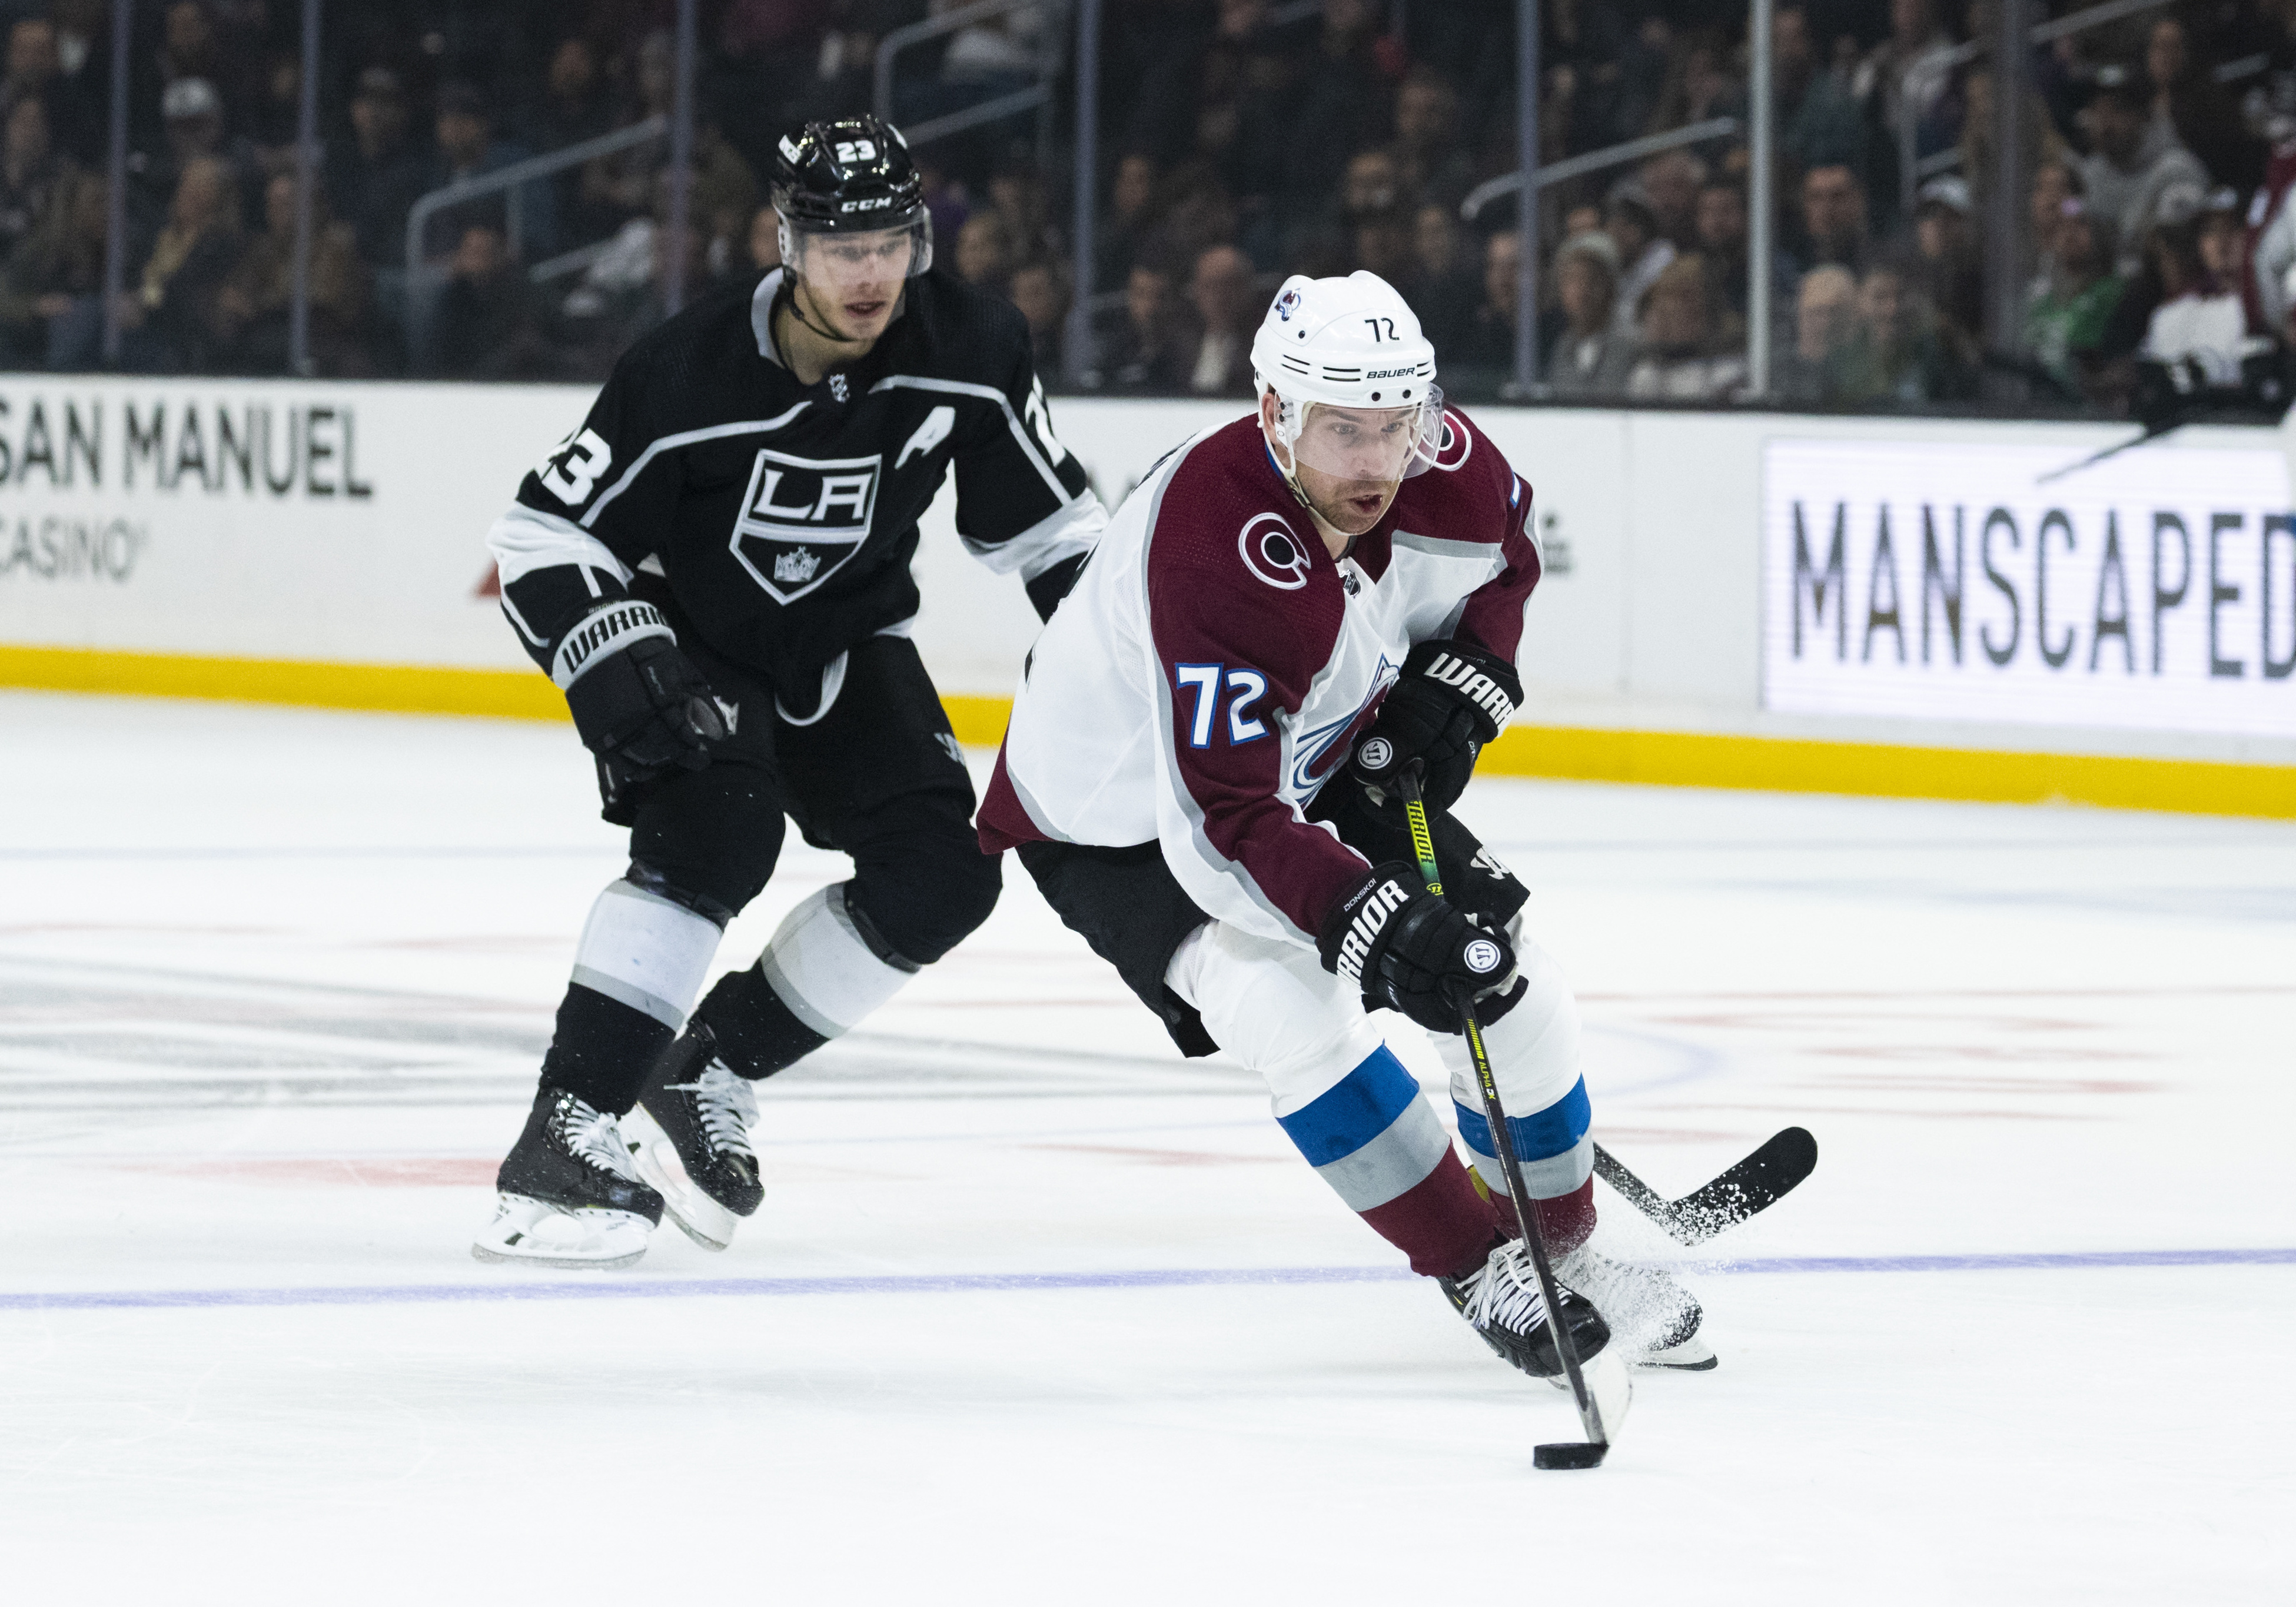 Colorado Avalanche right wing Joonas Donskoi (72) during the NHL regular season hockey game against the Los Angeles Kings on Monday, March 9, 2020 at Staples Center in Los Angeles, Calif.